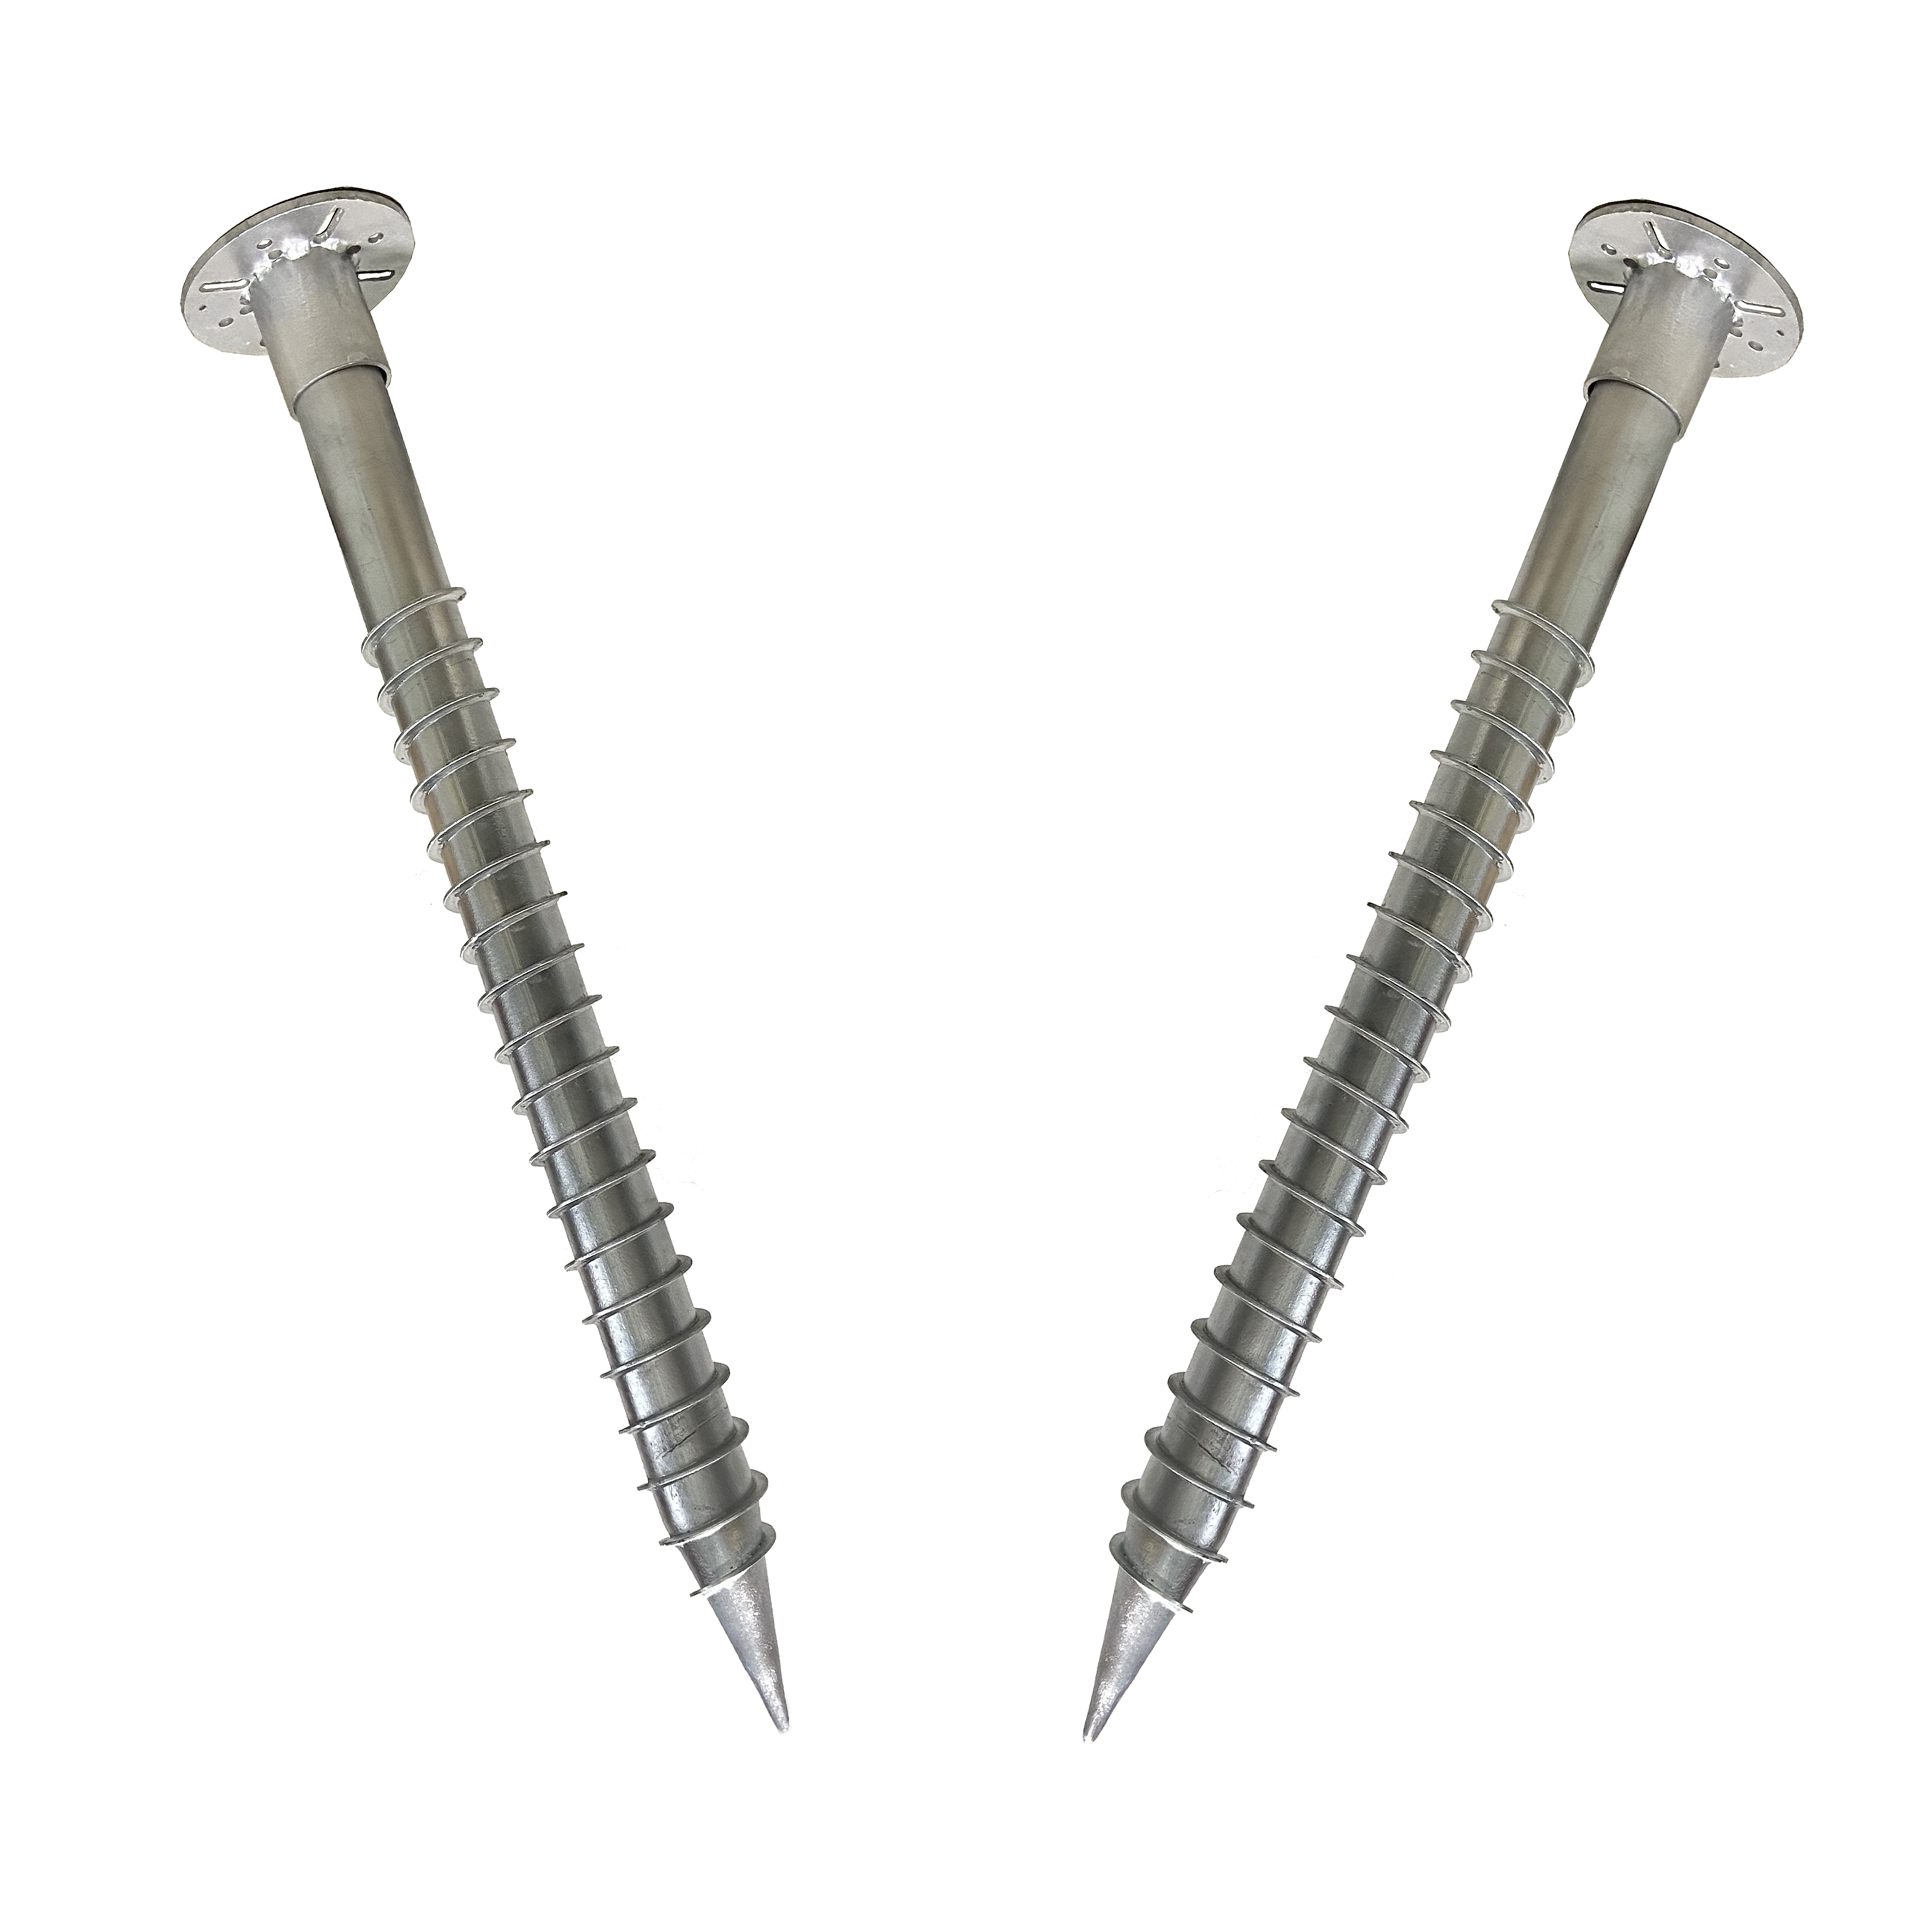  Hot Dipped Galvanized Ground Screw for Solar Panel System